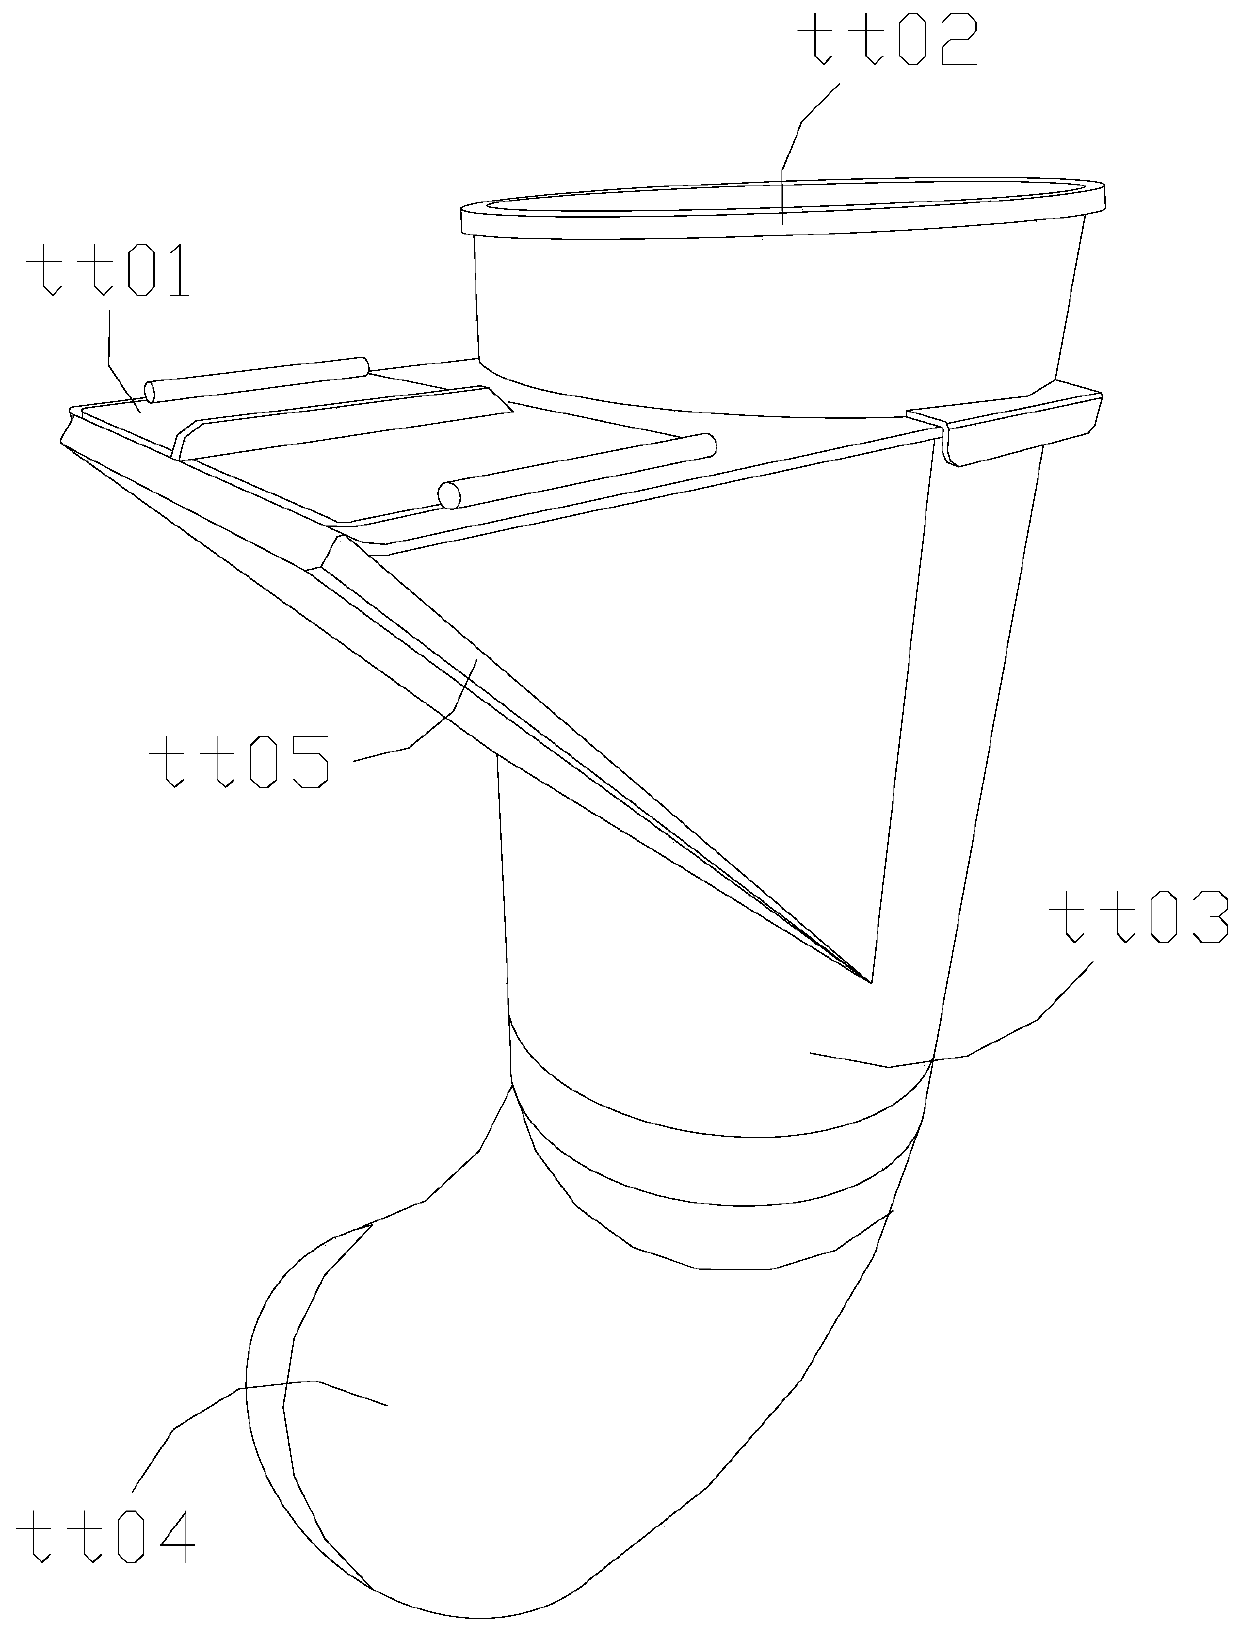 Garbage vertical discharge device for building high-rise